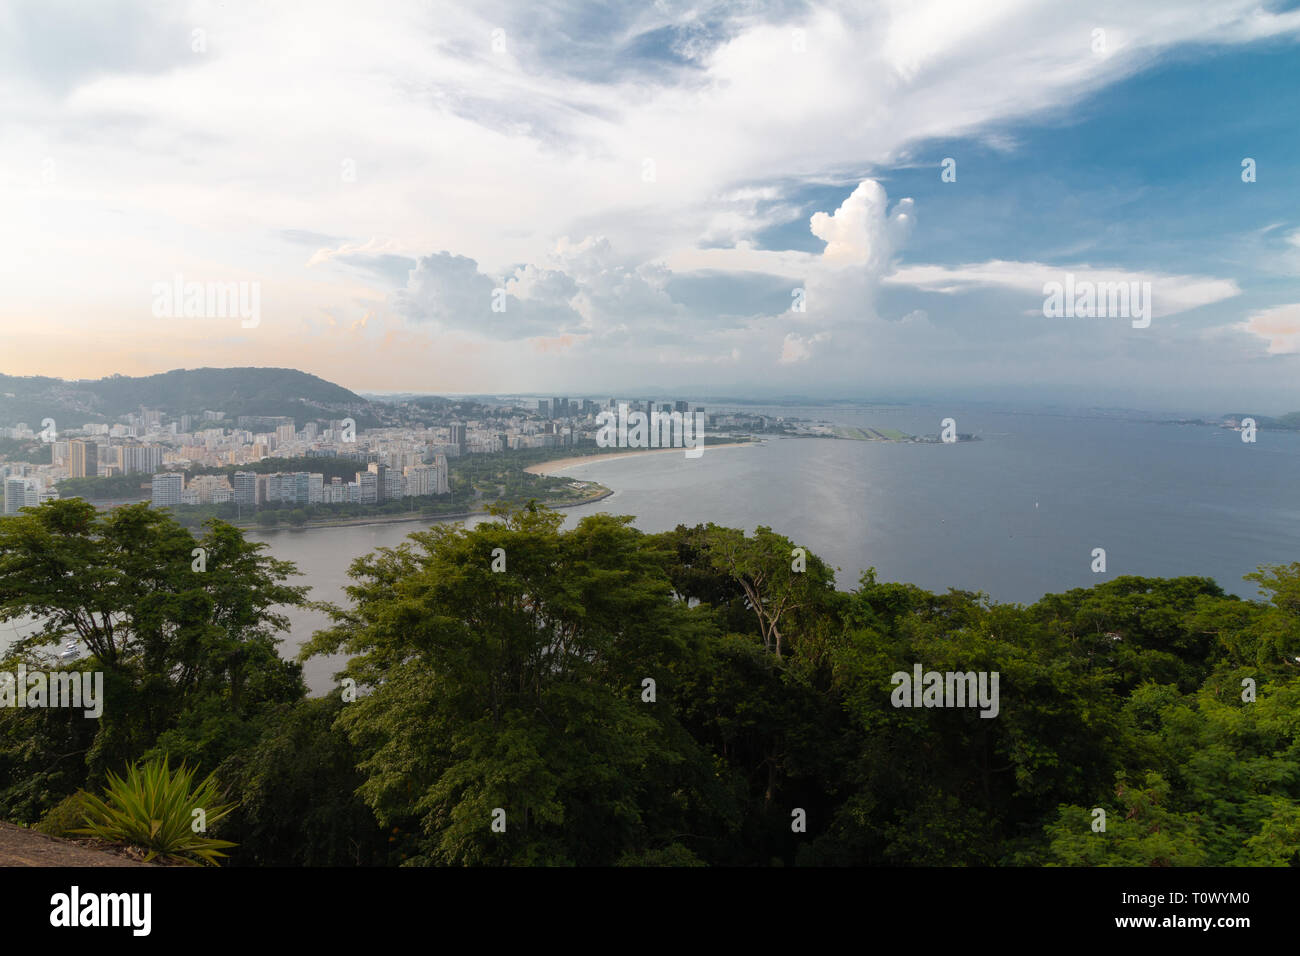 The Rio de cityscape view during sunset. Stock Photo